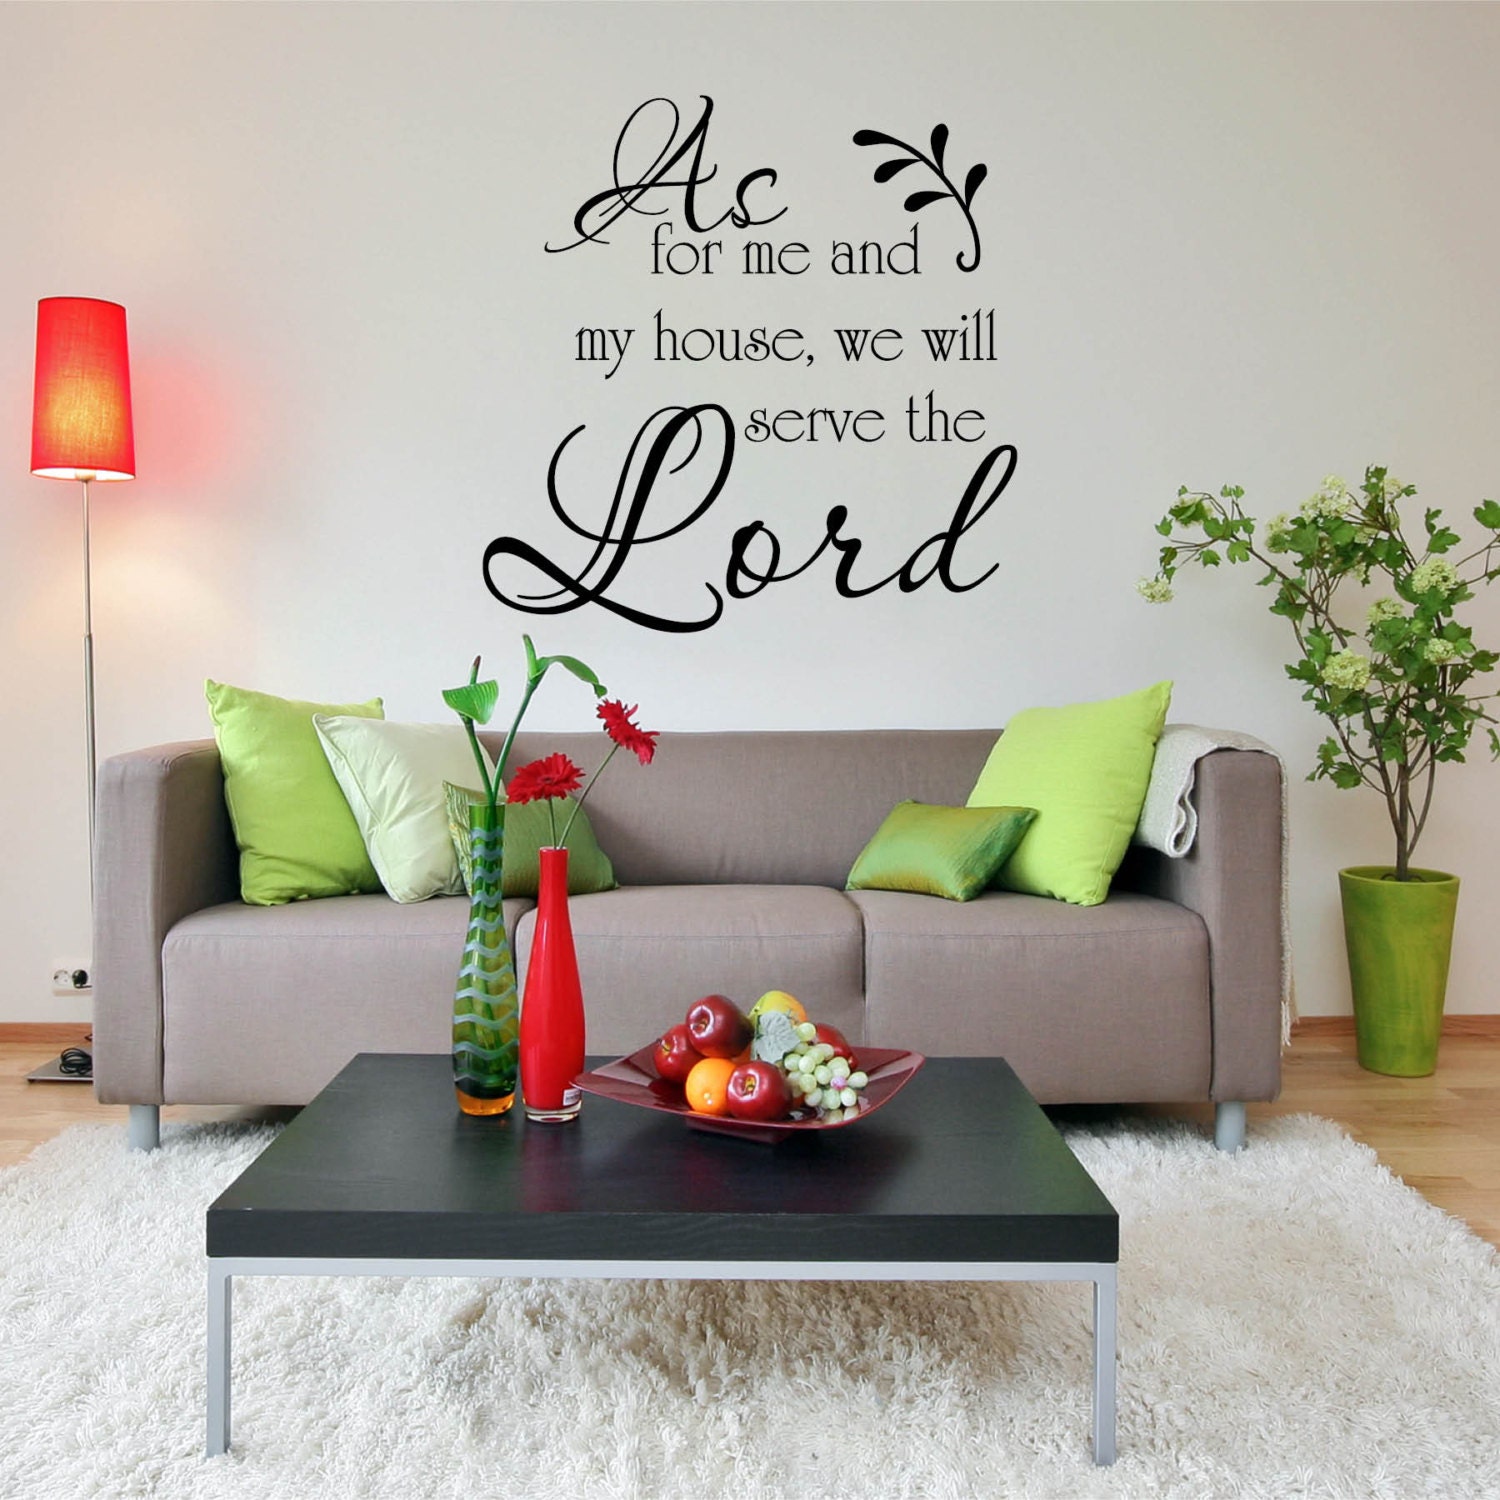 Christian Wall Decal Quote Living Room Wall Decal Religious